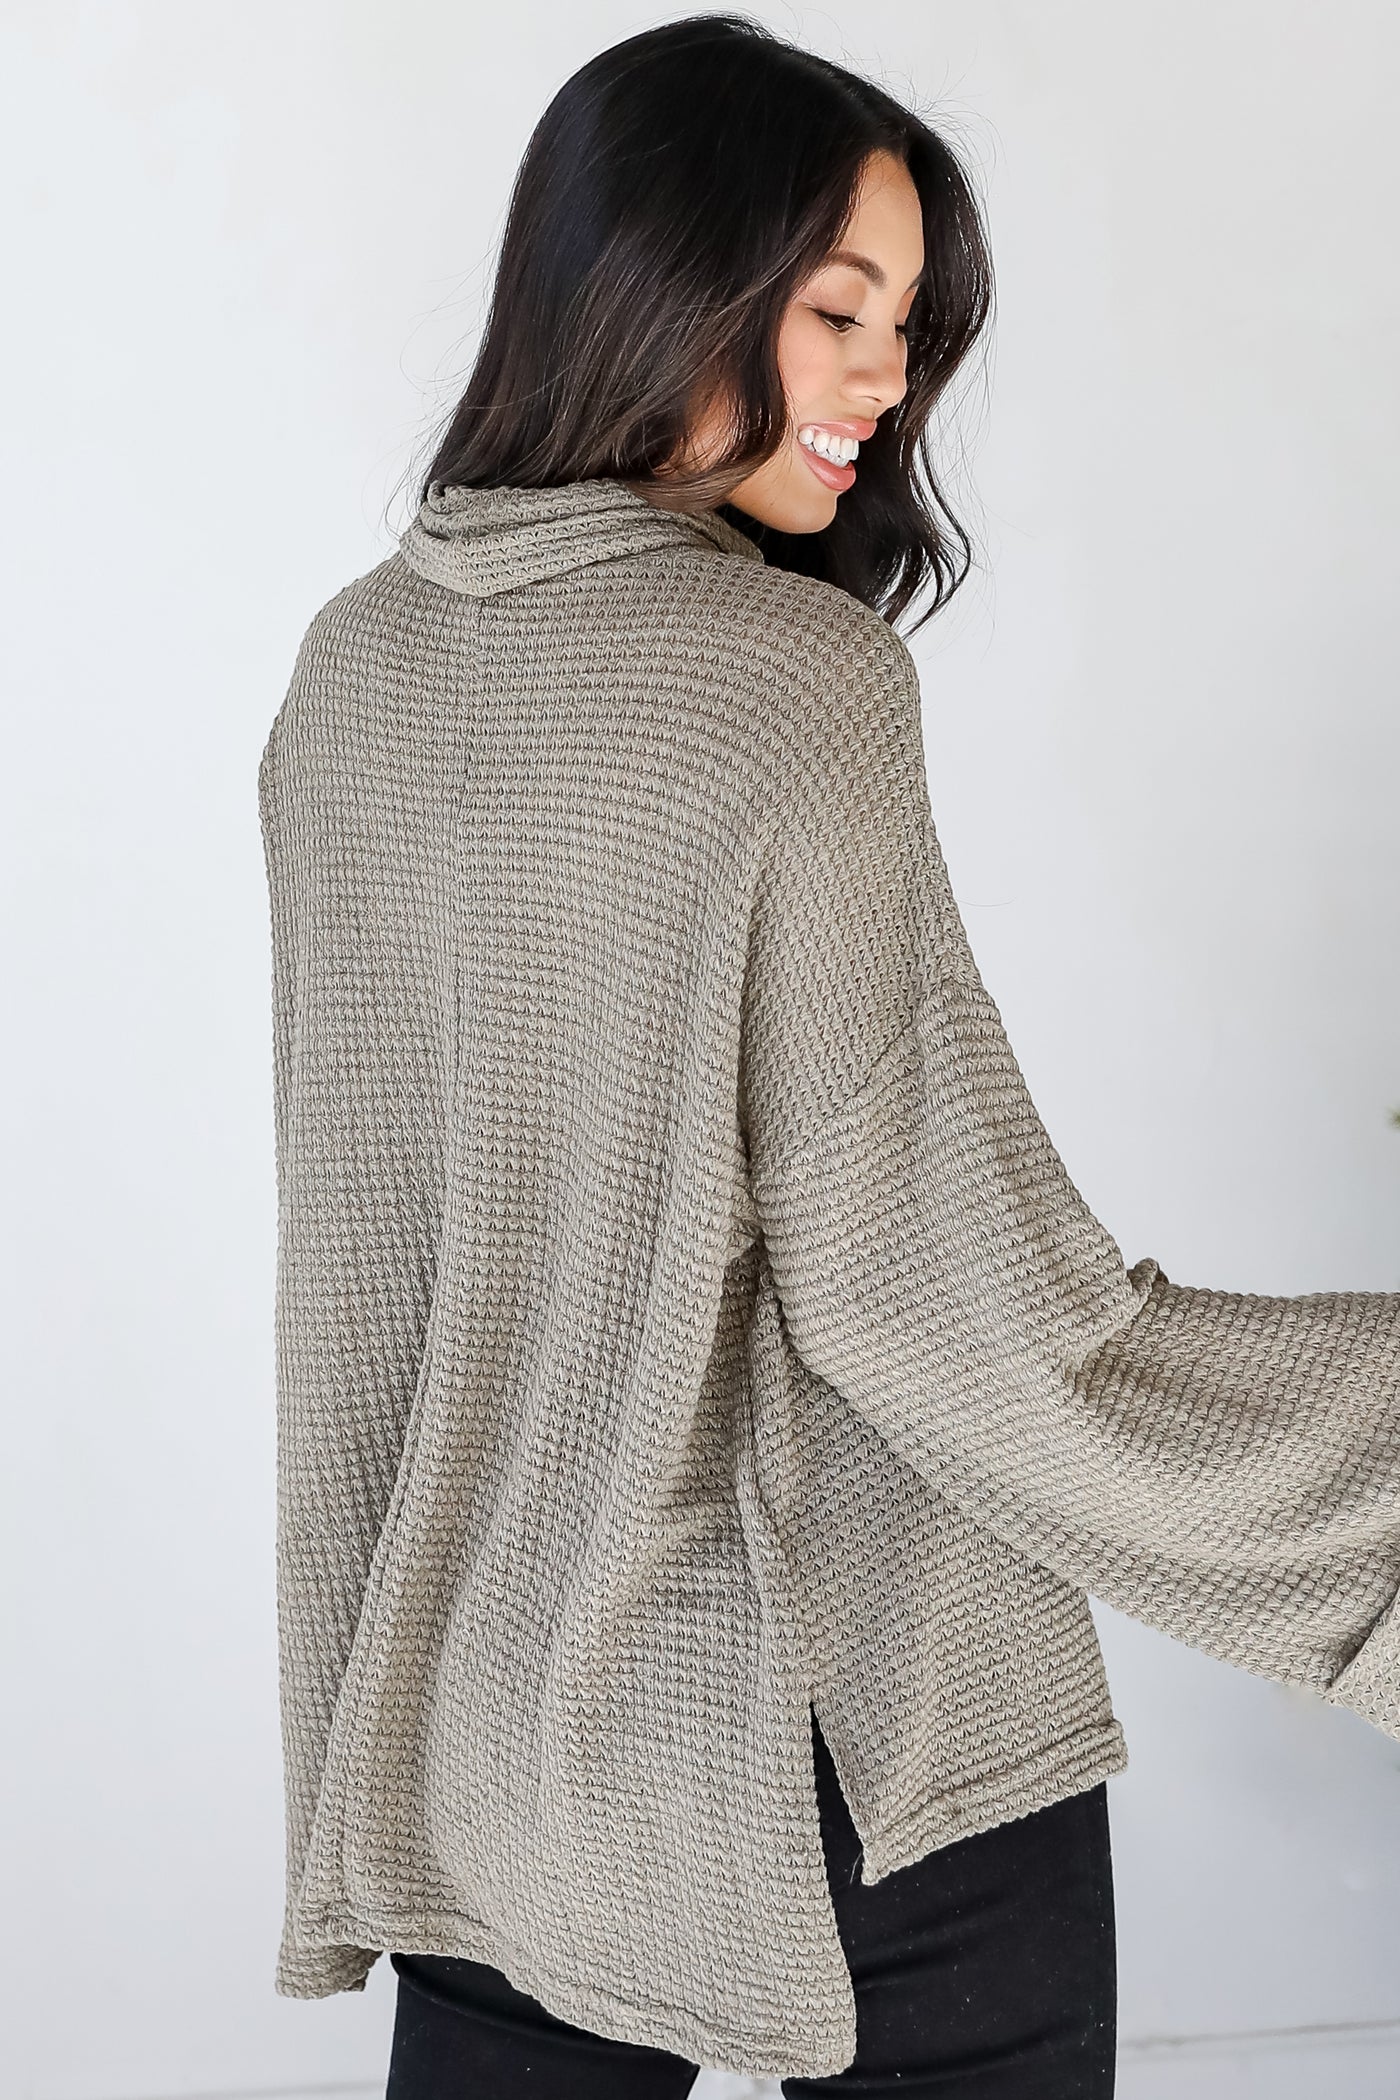 Waffle Knit Top in olive back view